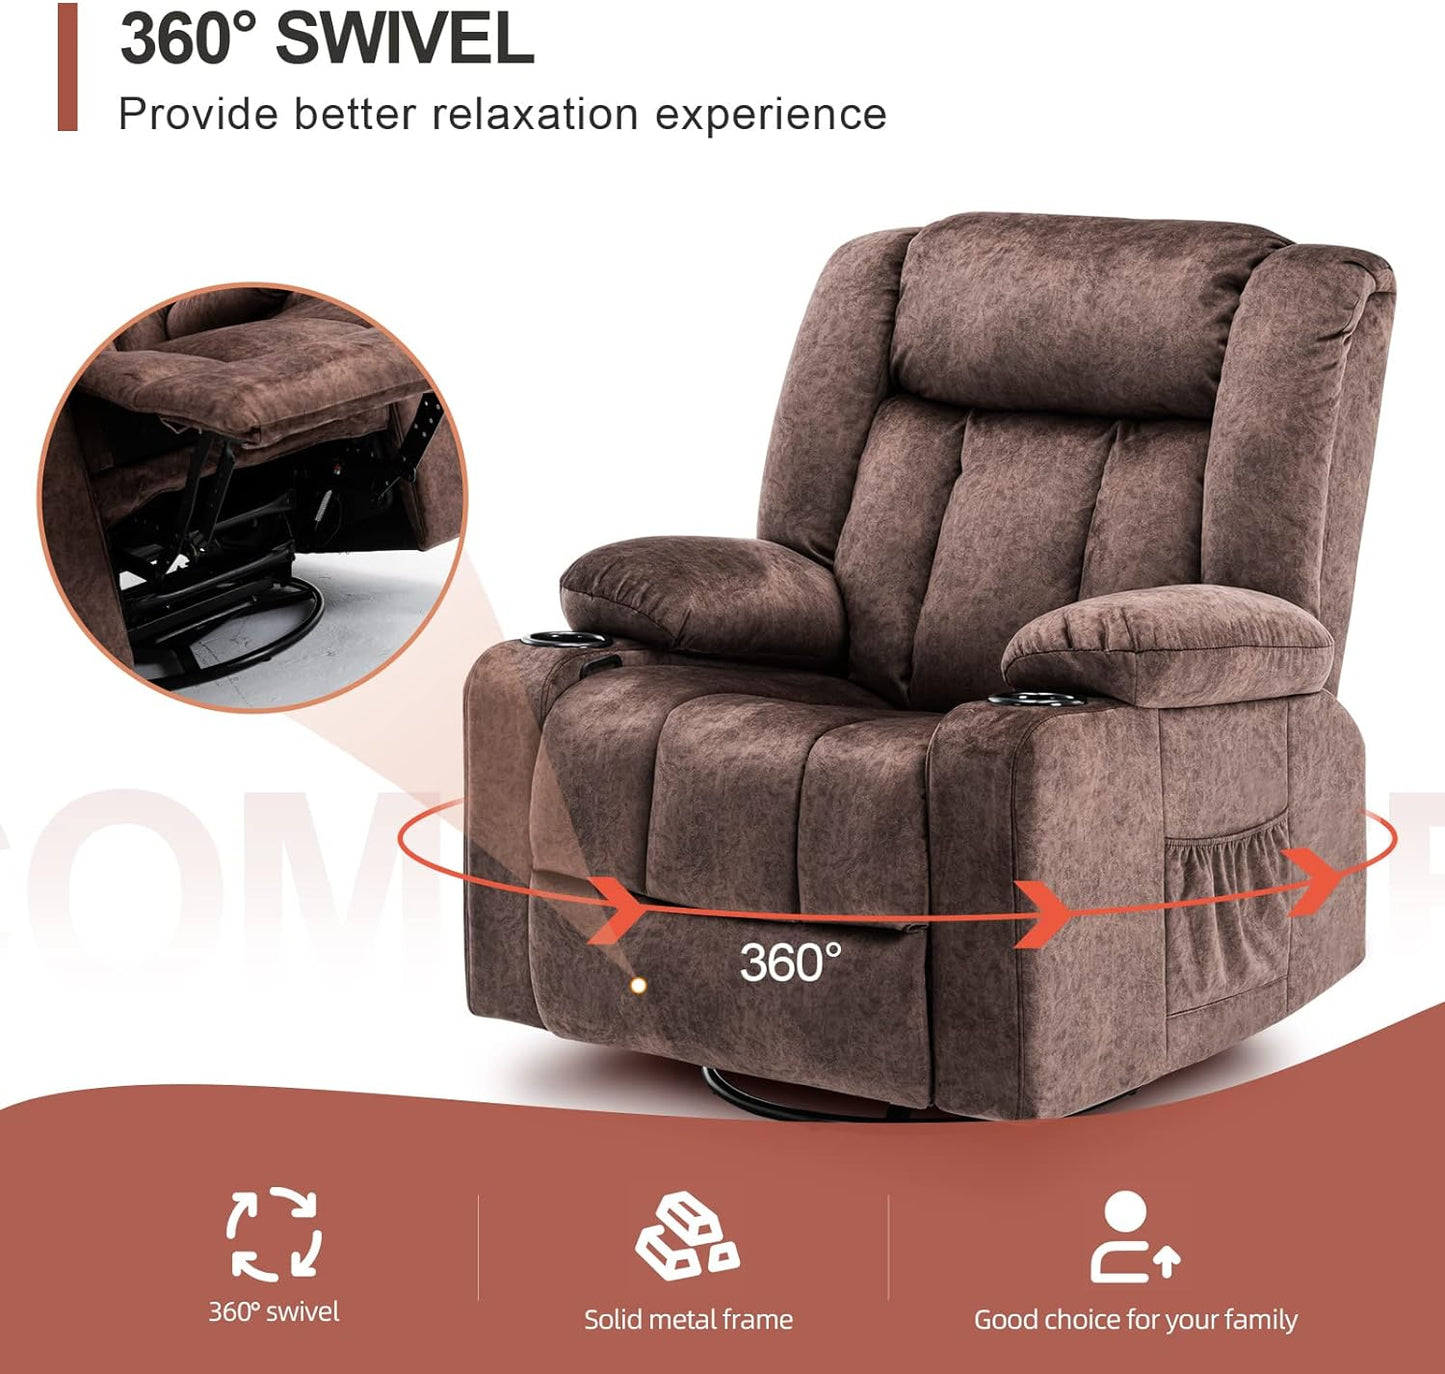 NEW - COMHOMA Recliner Chair Massage Rocker with Heated 360 Degree Swivel Lazy Boy Recliner Single Sofa Seat with Cup Holders for Living Room (brown) - Retail $289